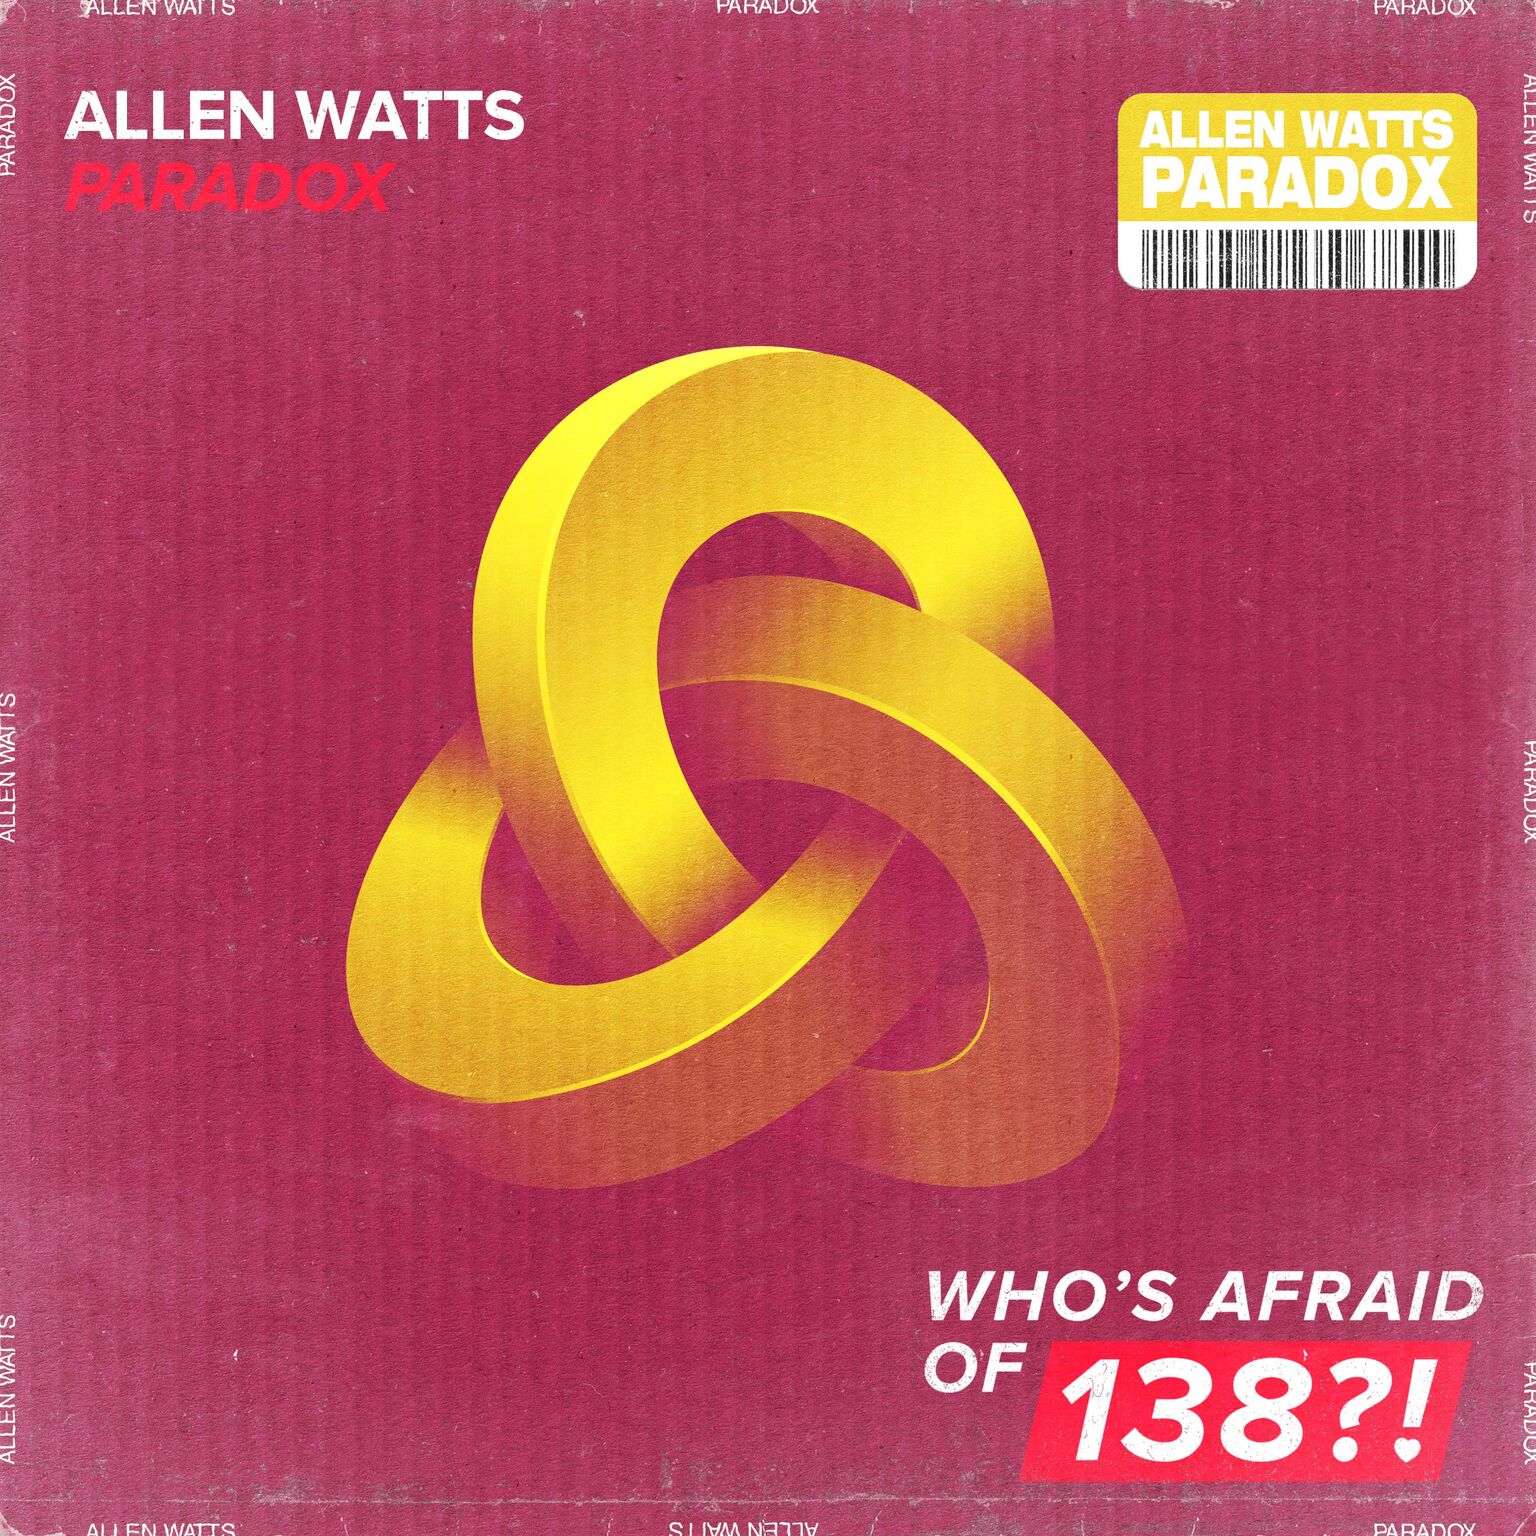 Allen Watts presents Paradox on Who's Afraid Of 138?!